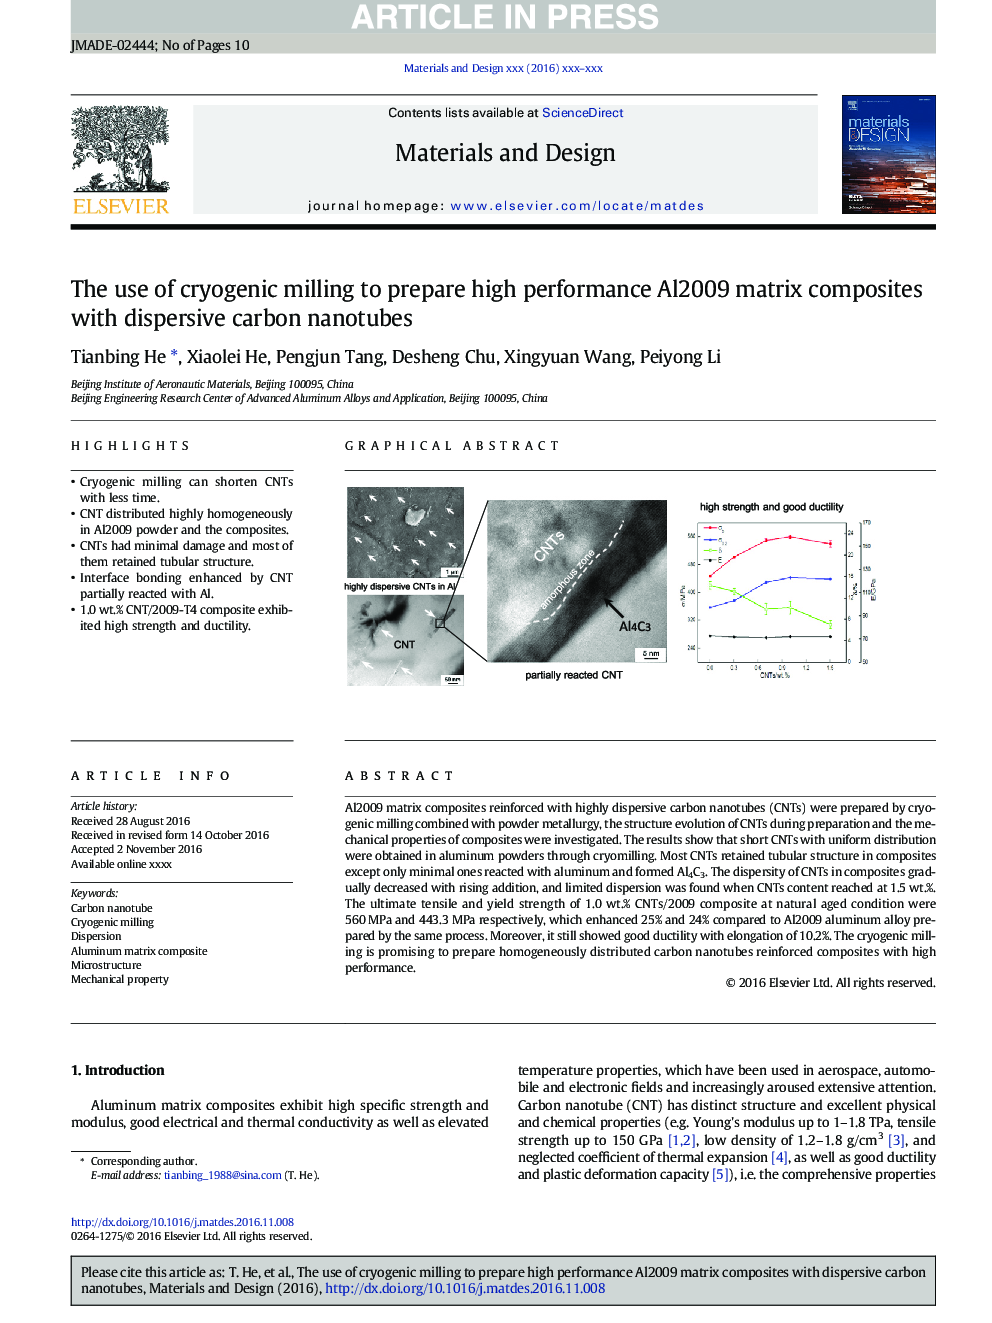 The use of cryogenic milling to prepare high performance Al2009 matrix composites with dispersive carbon nanotubes